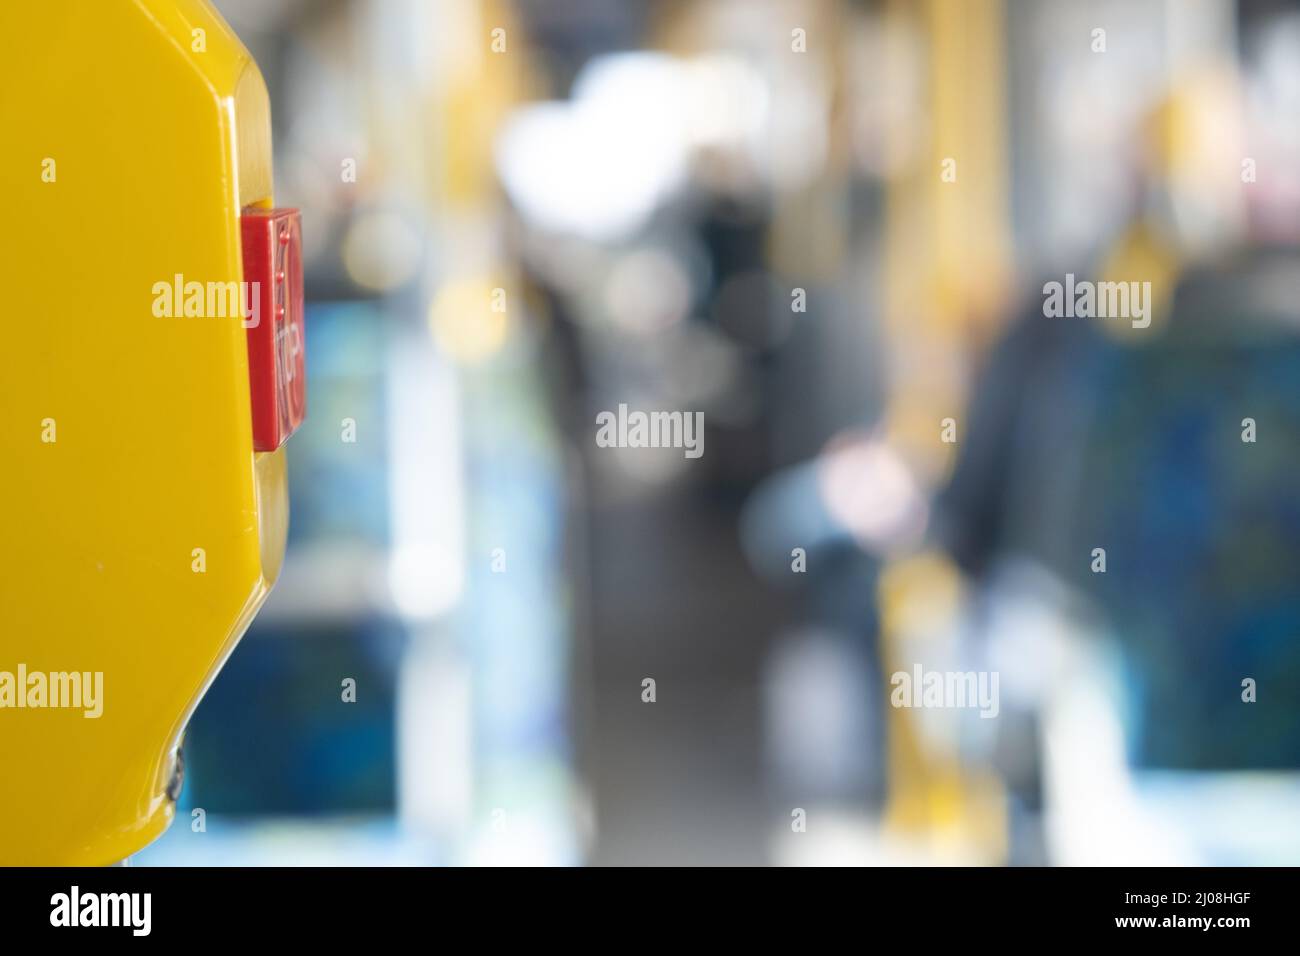 Stockholm / Sweden - MARCH 14, 2022: Closeup of a Hold request button on a bus with unfocus corridor in the background. Stock Photo